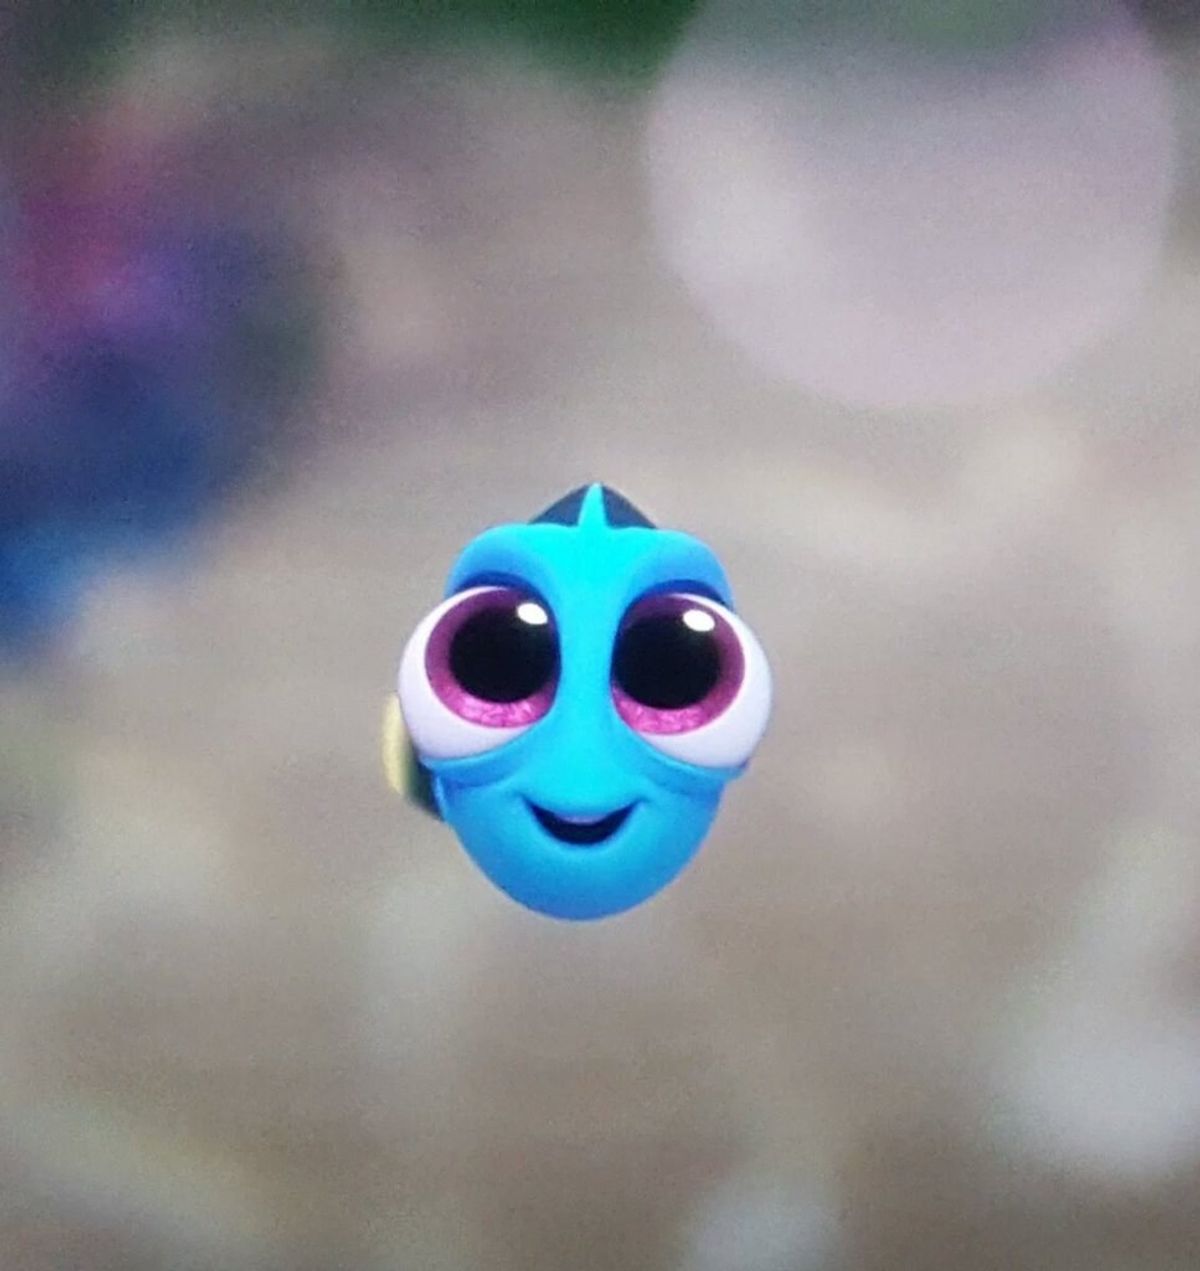 A Review Of "Finding Dory"